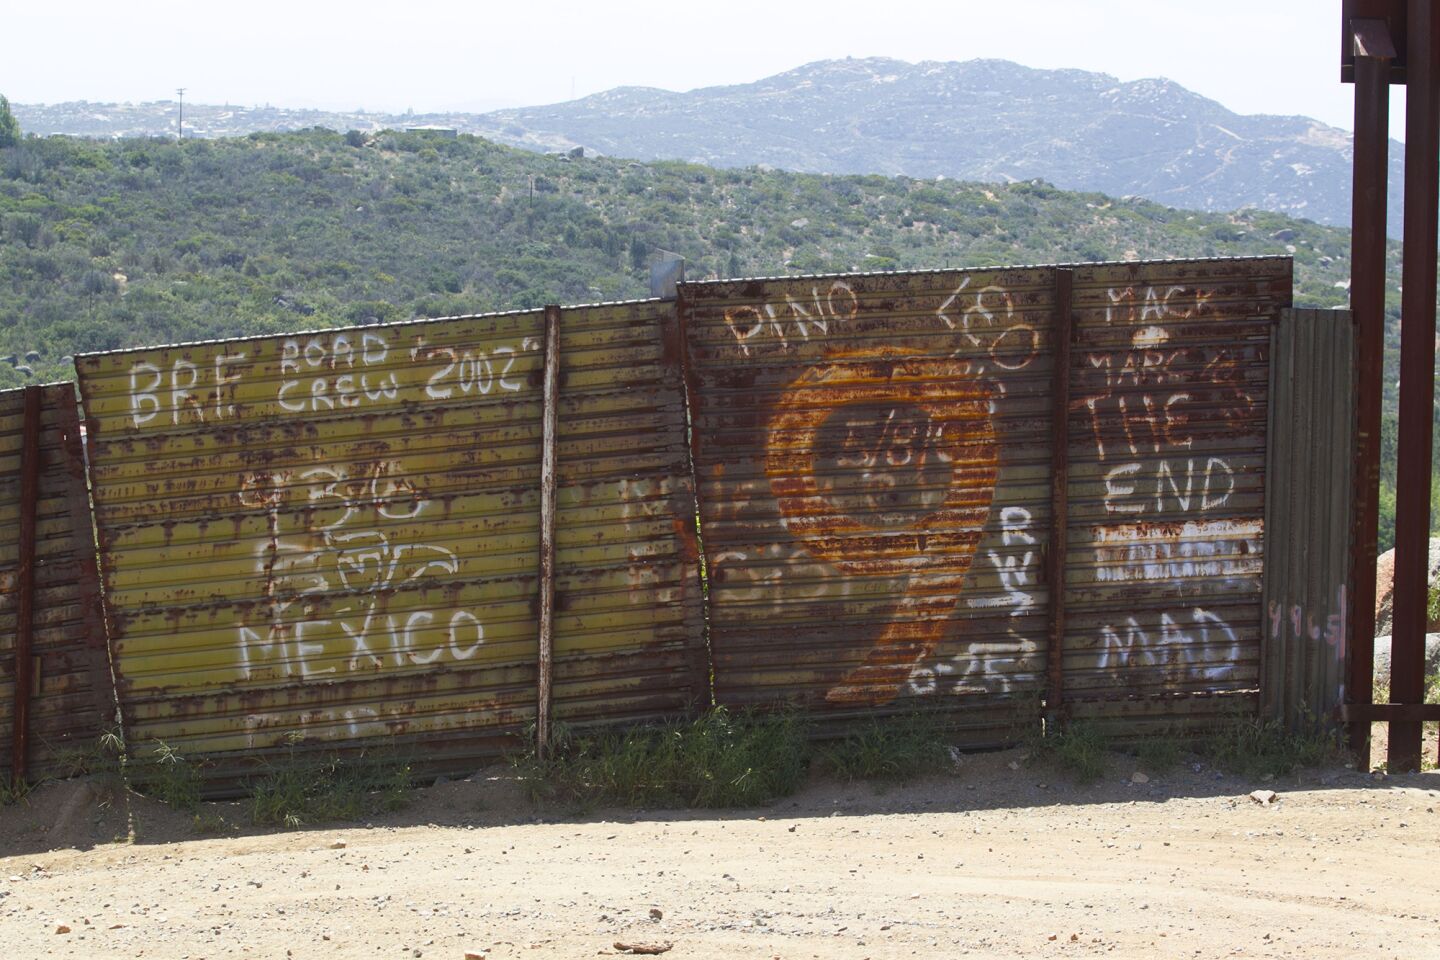 Here, an older part of the border fence shows graffiti.